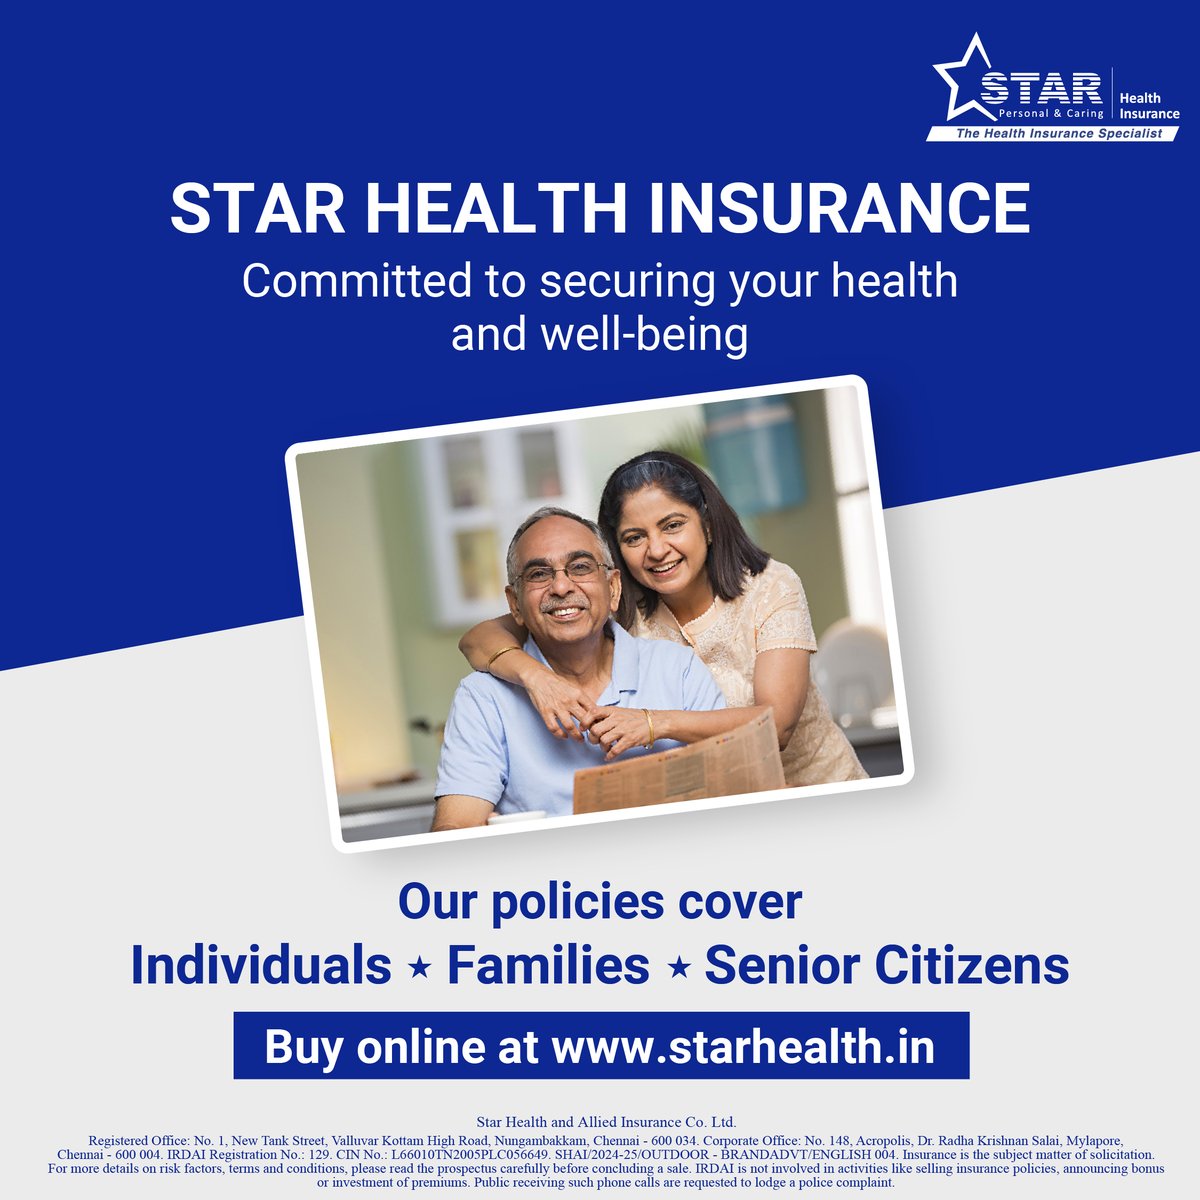 Life's precious moments are best shared in good health. Insure with STAR Health for a secure future!

#starhealth #starhealthinsurance #healthinsurance